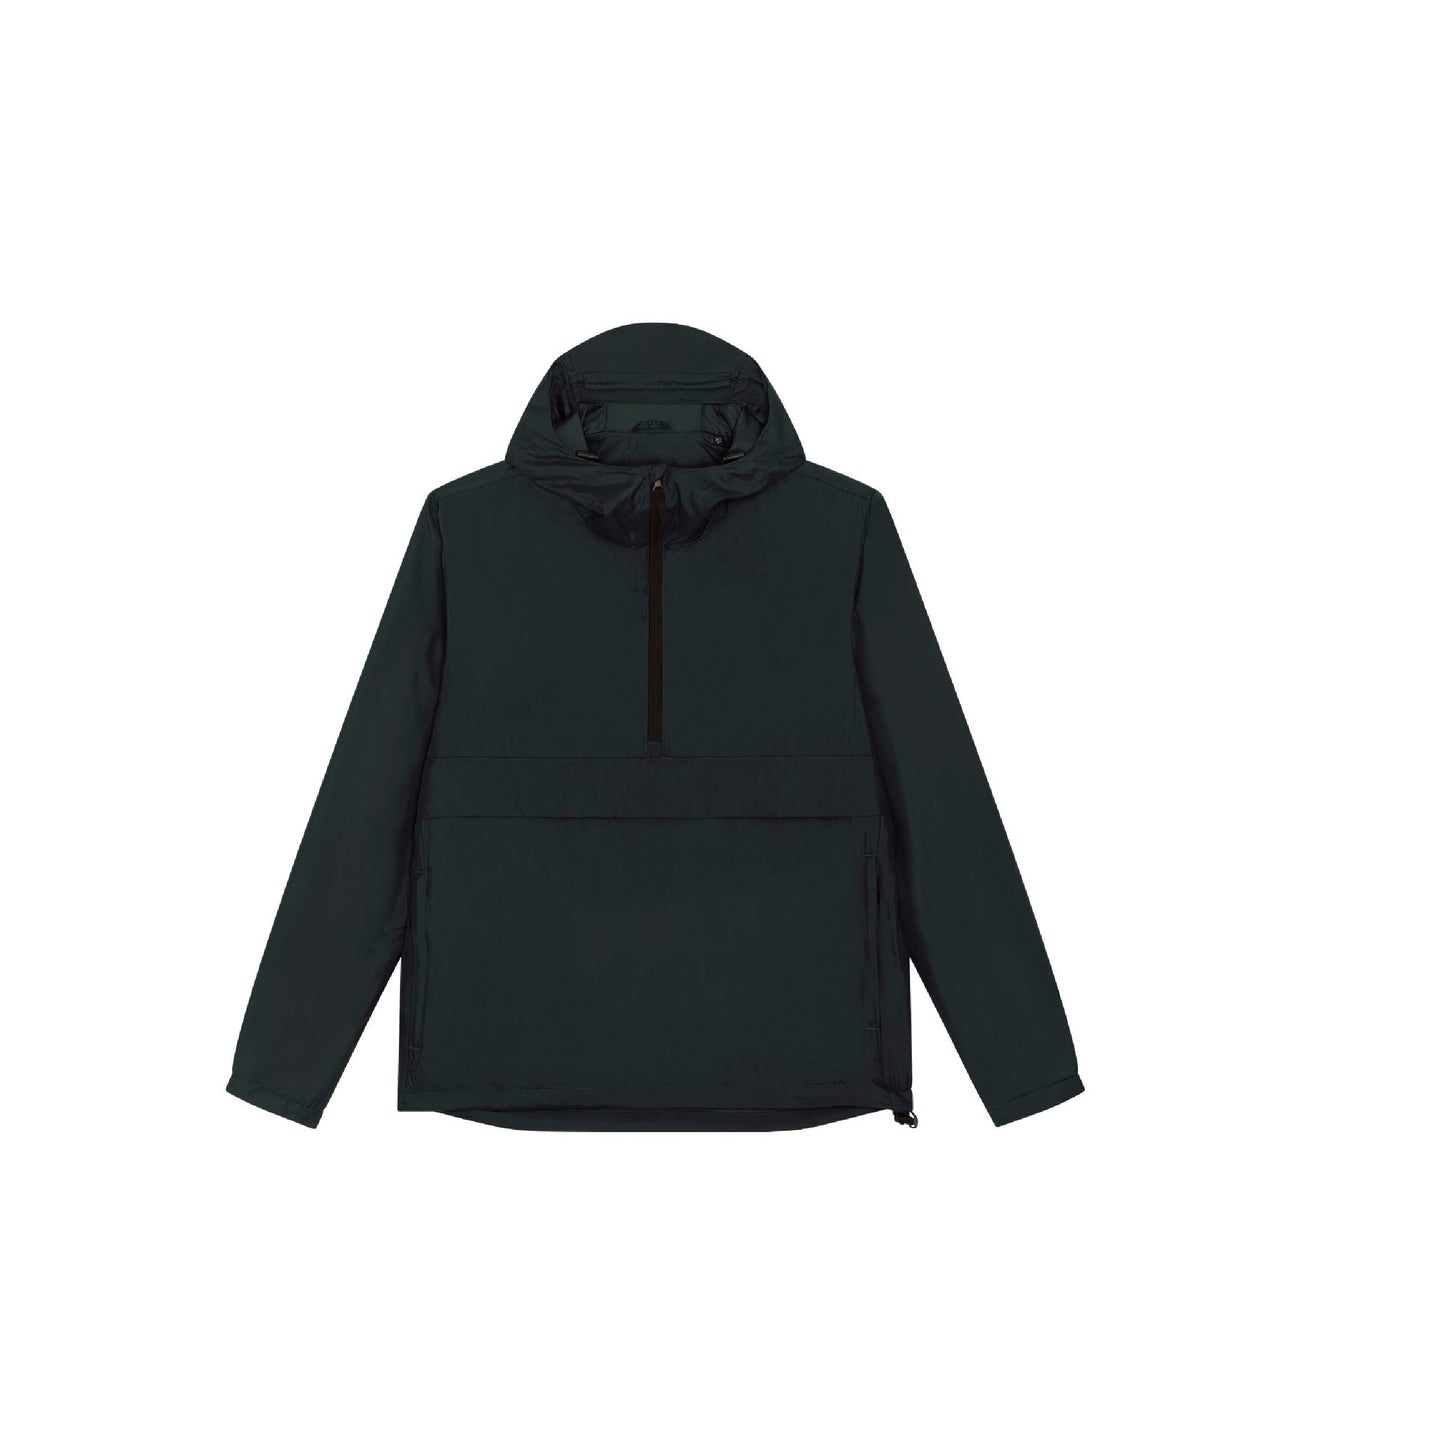 mecilla [26834] The Unisex Over The Head Jacket